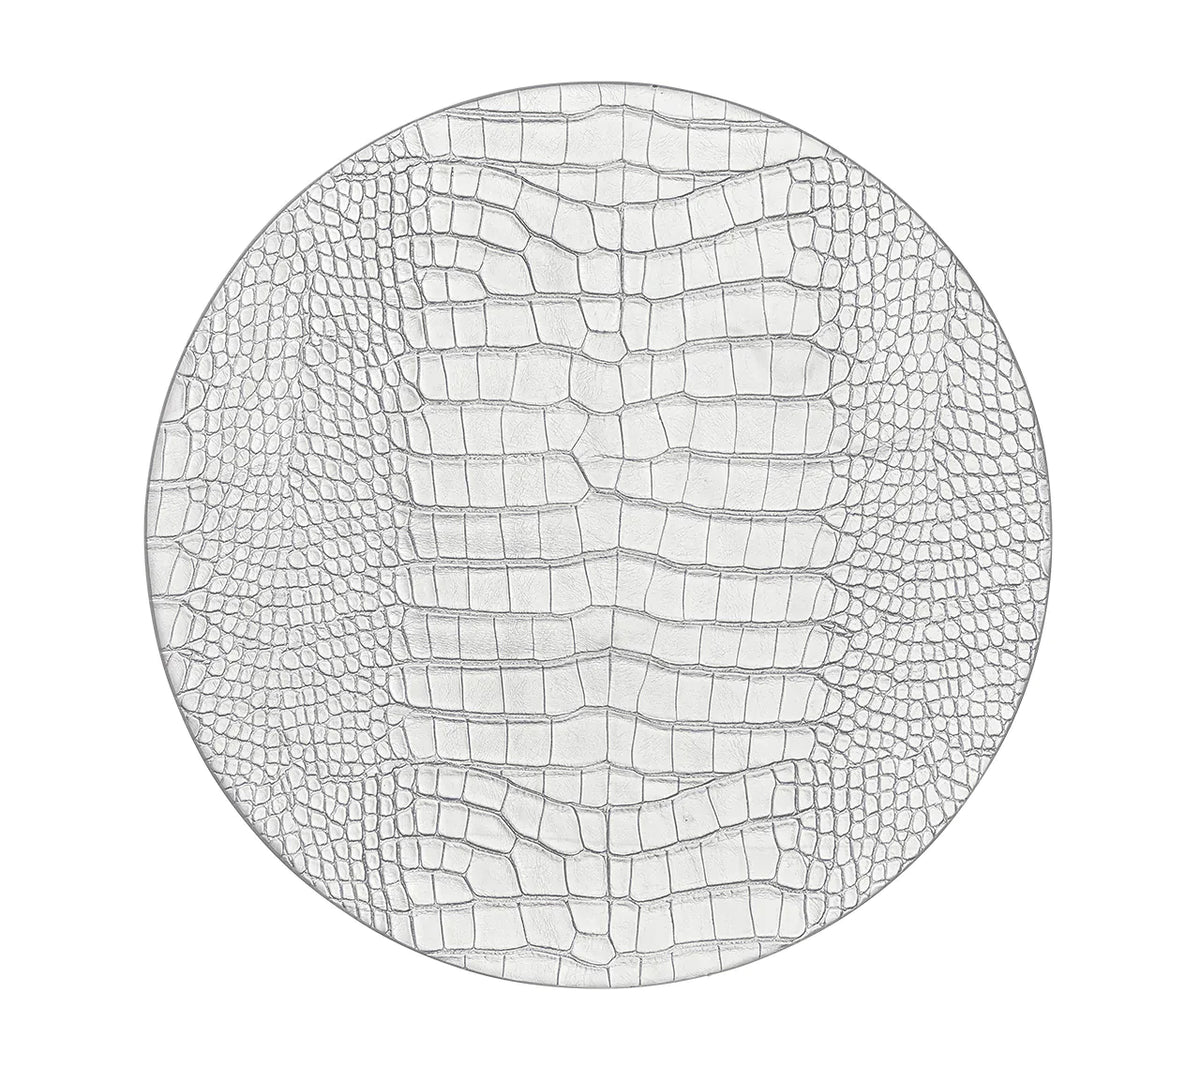 Croco Placemat, Set of 4